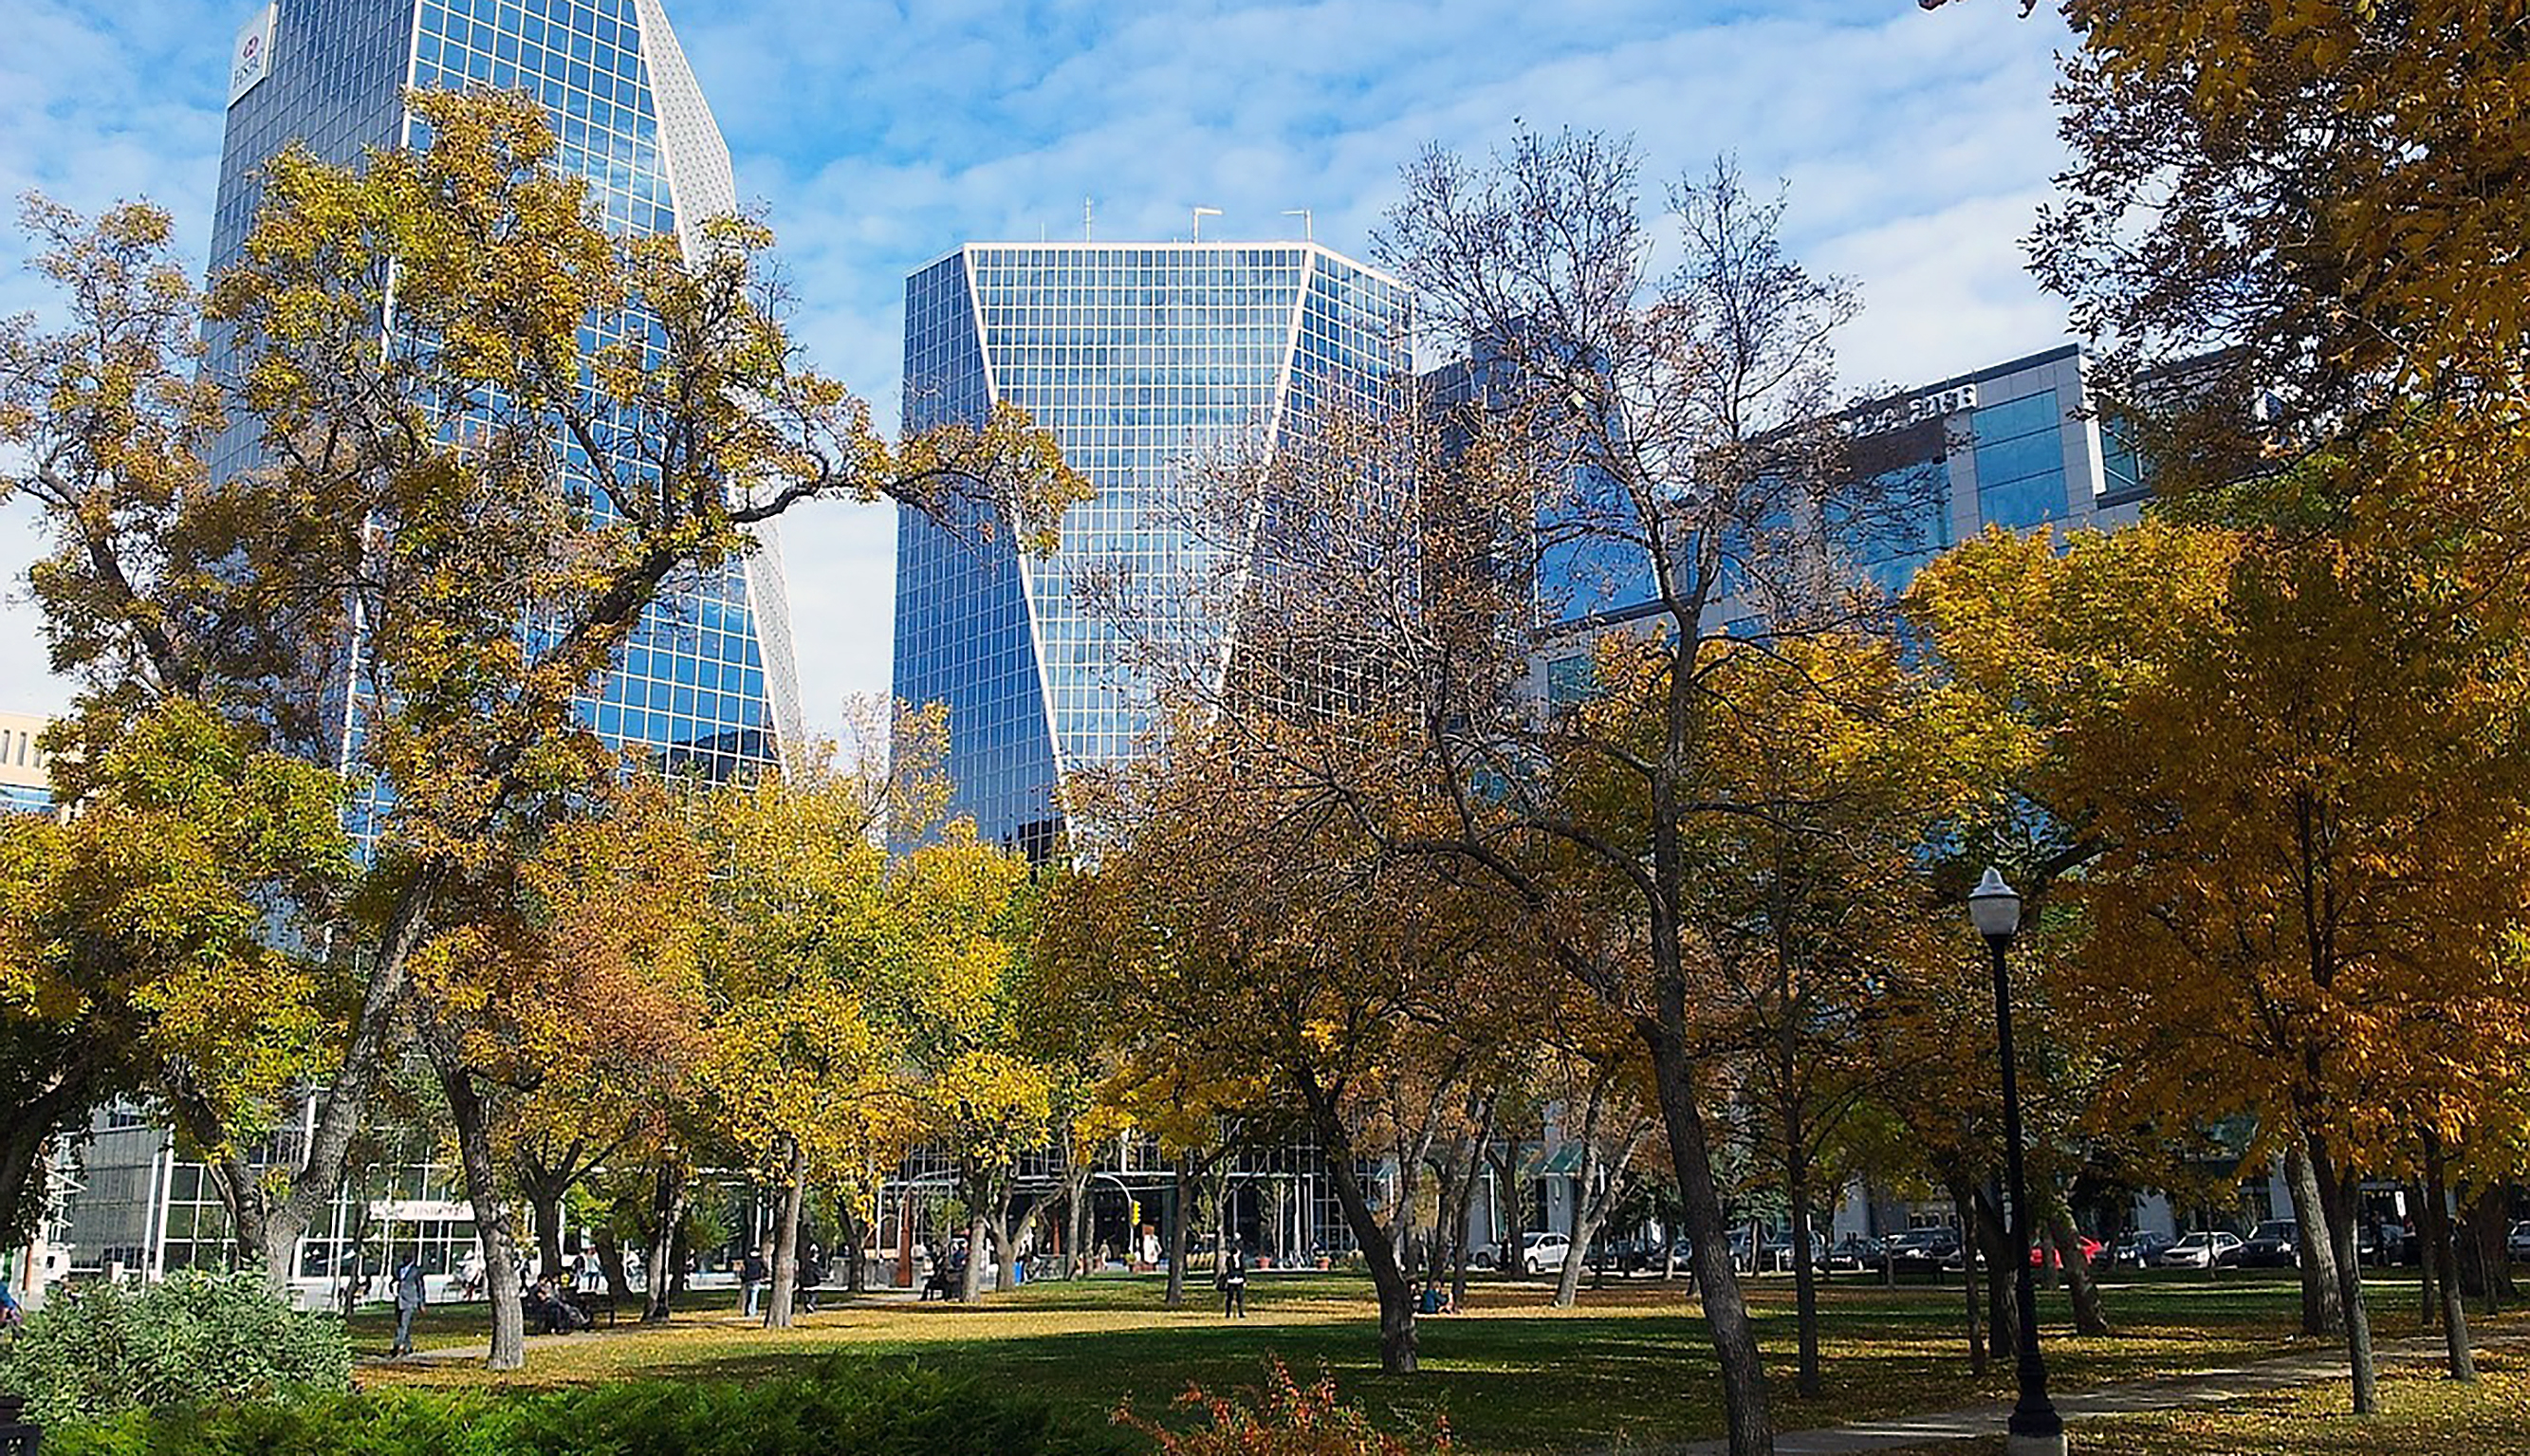 Trees in a park in front of tall buildings.